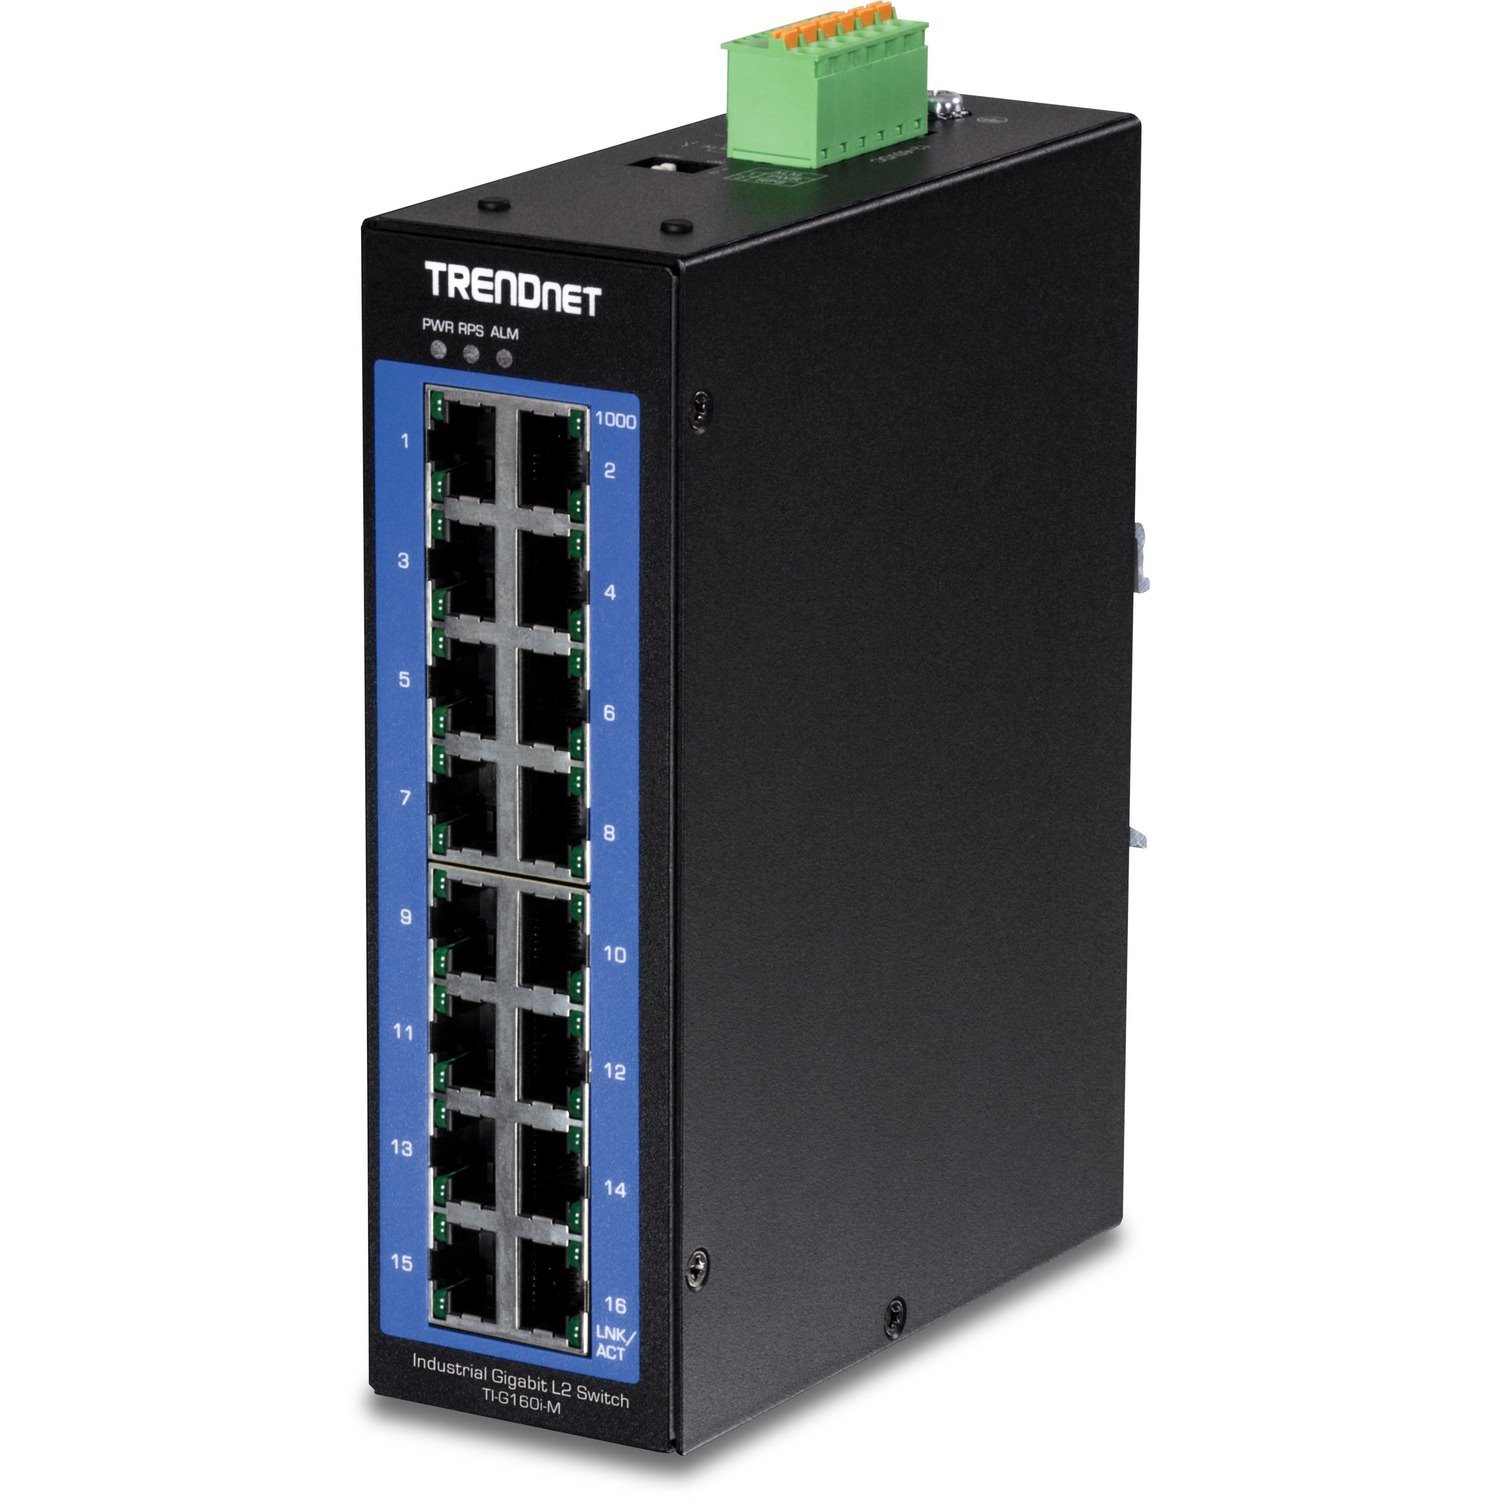 TRENDnet 16-Port Industrial Gigabit L2 Managed DIN Rail Switch, 16 x Gigabit Ports, Wide Temperature Layer 2 Switch, 32 Gbps Switching Capacity, Black, TI-G160i-M